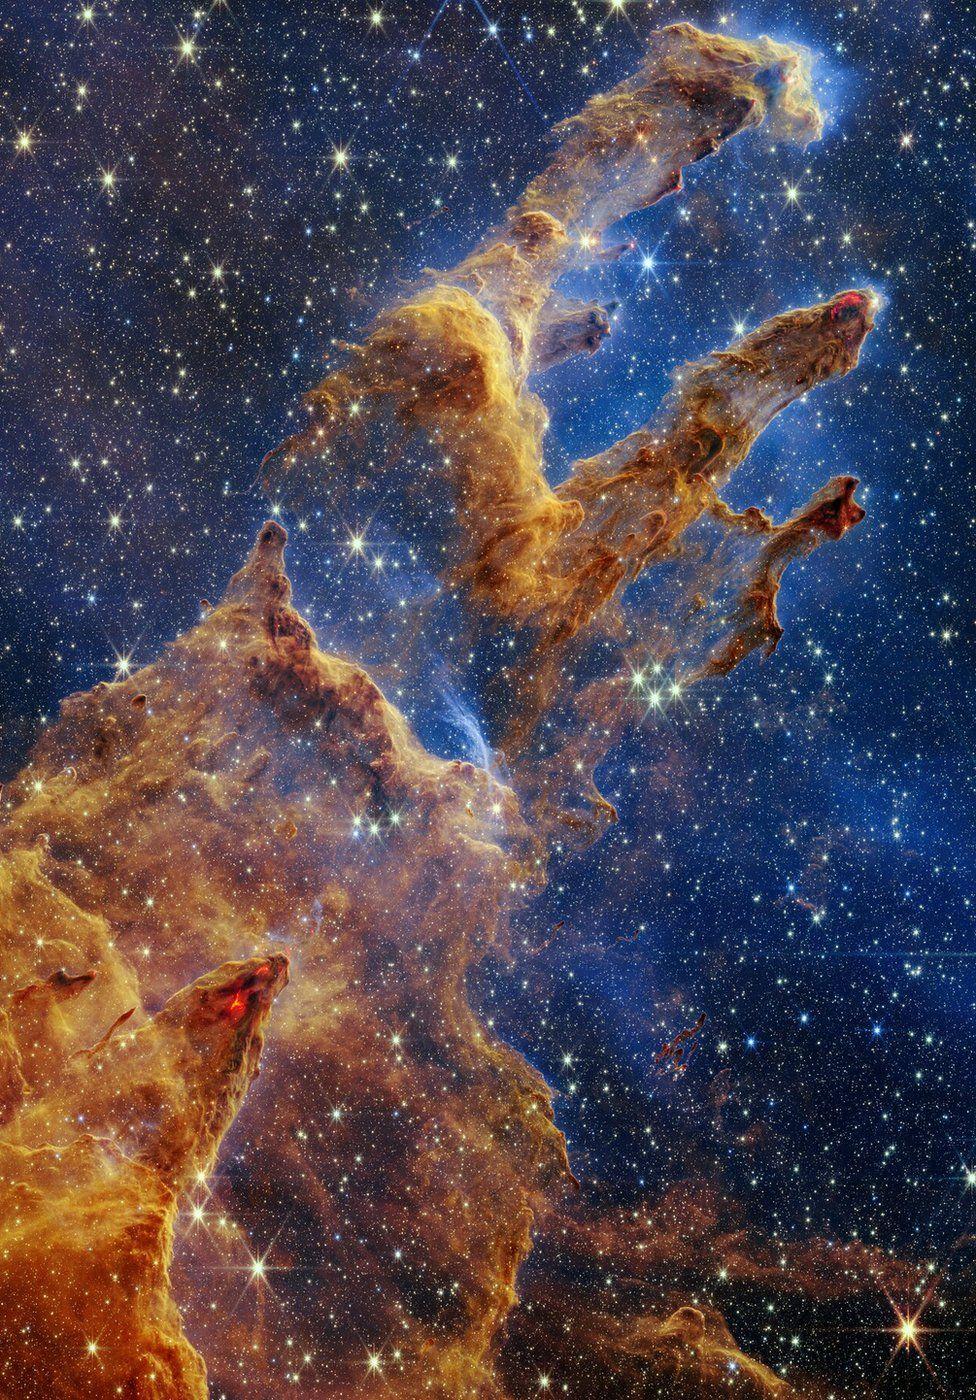 Pillars are cold and dense clouds of hydrogen and dust